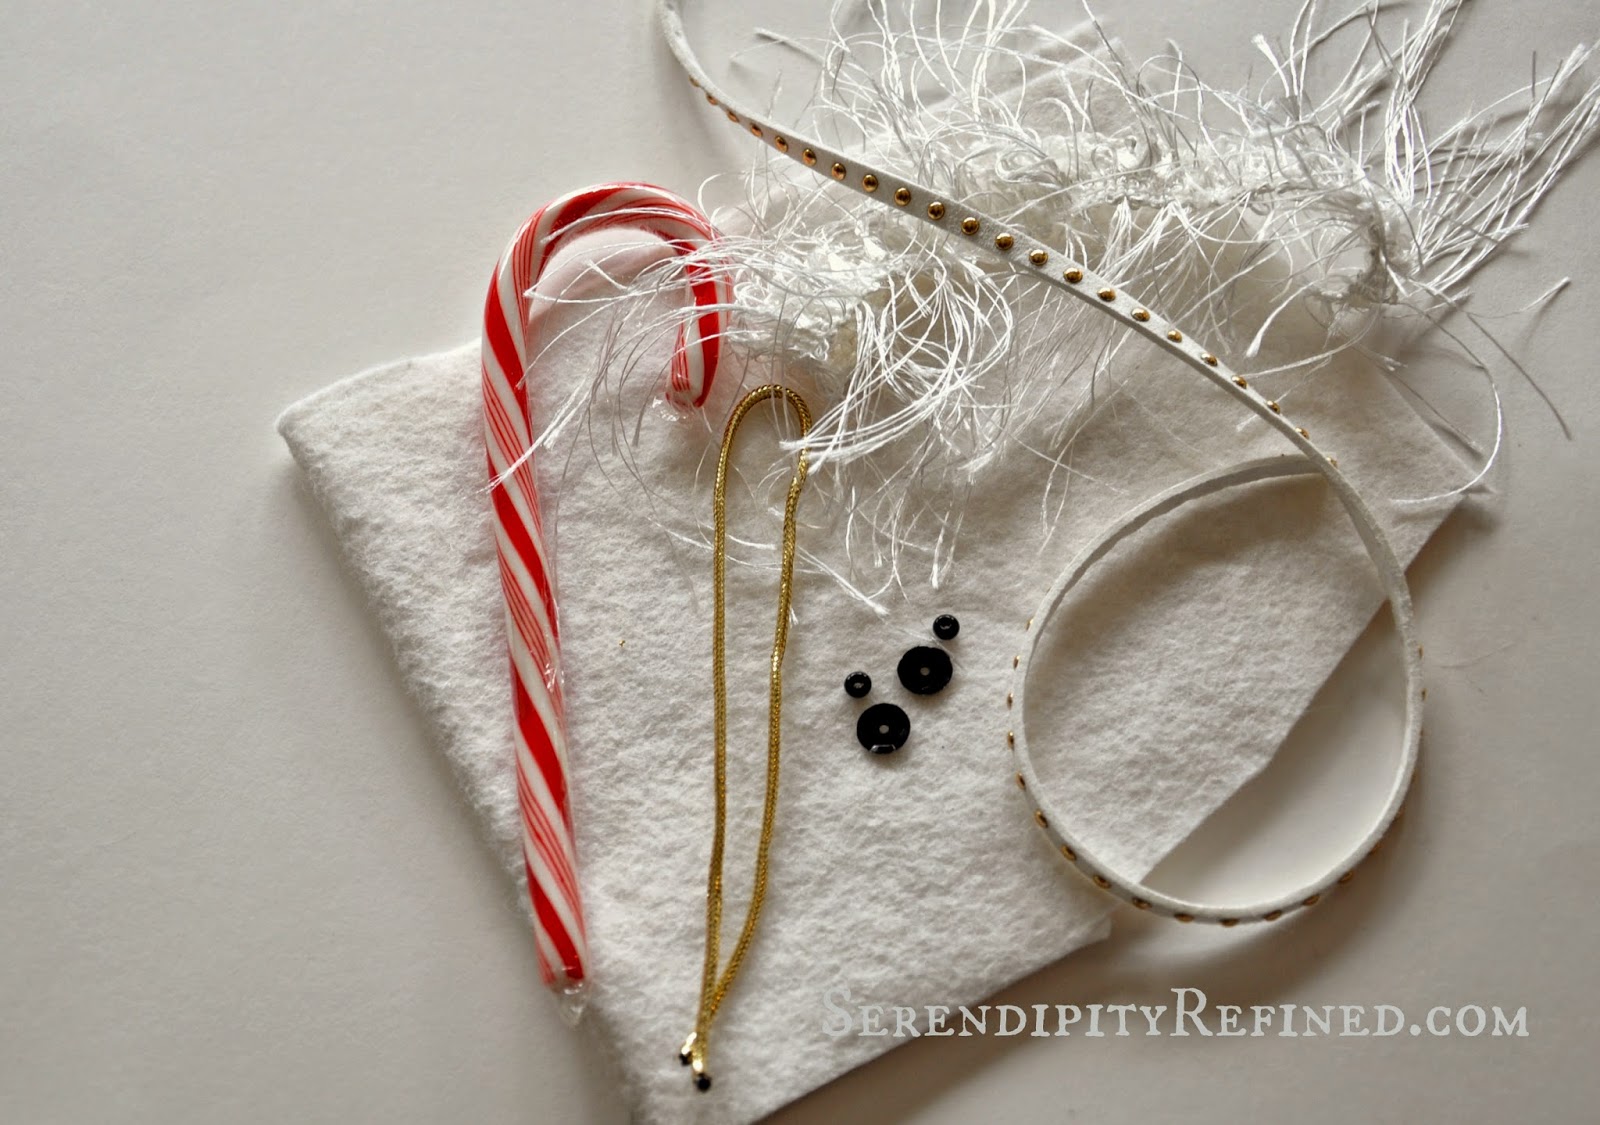 Make This Super Cute Candy Cane Horse Head Ornament! No Sewing!3